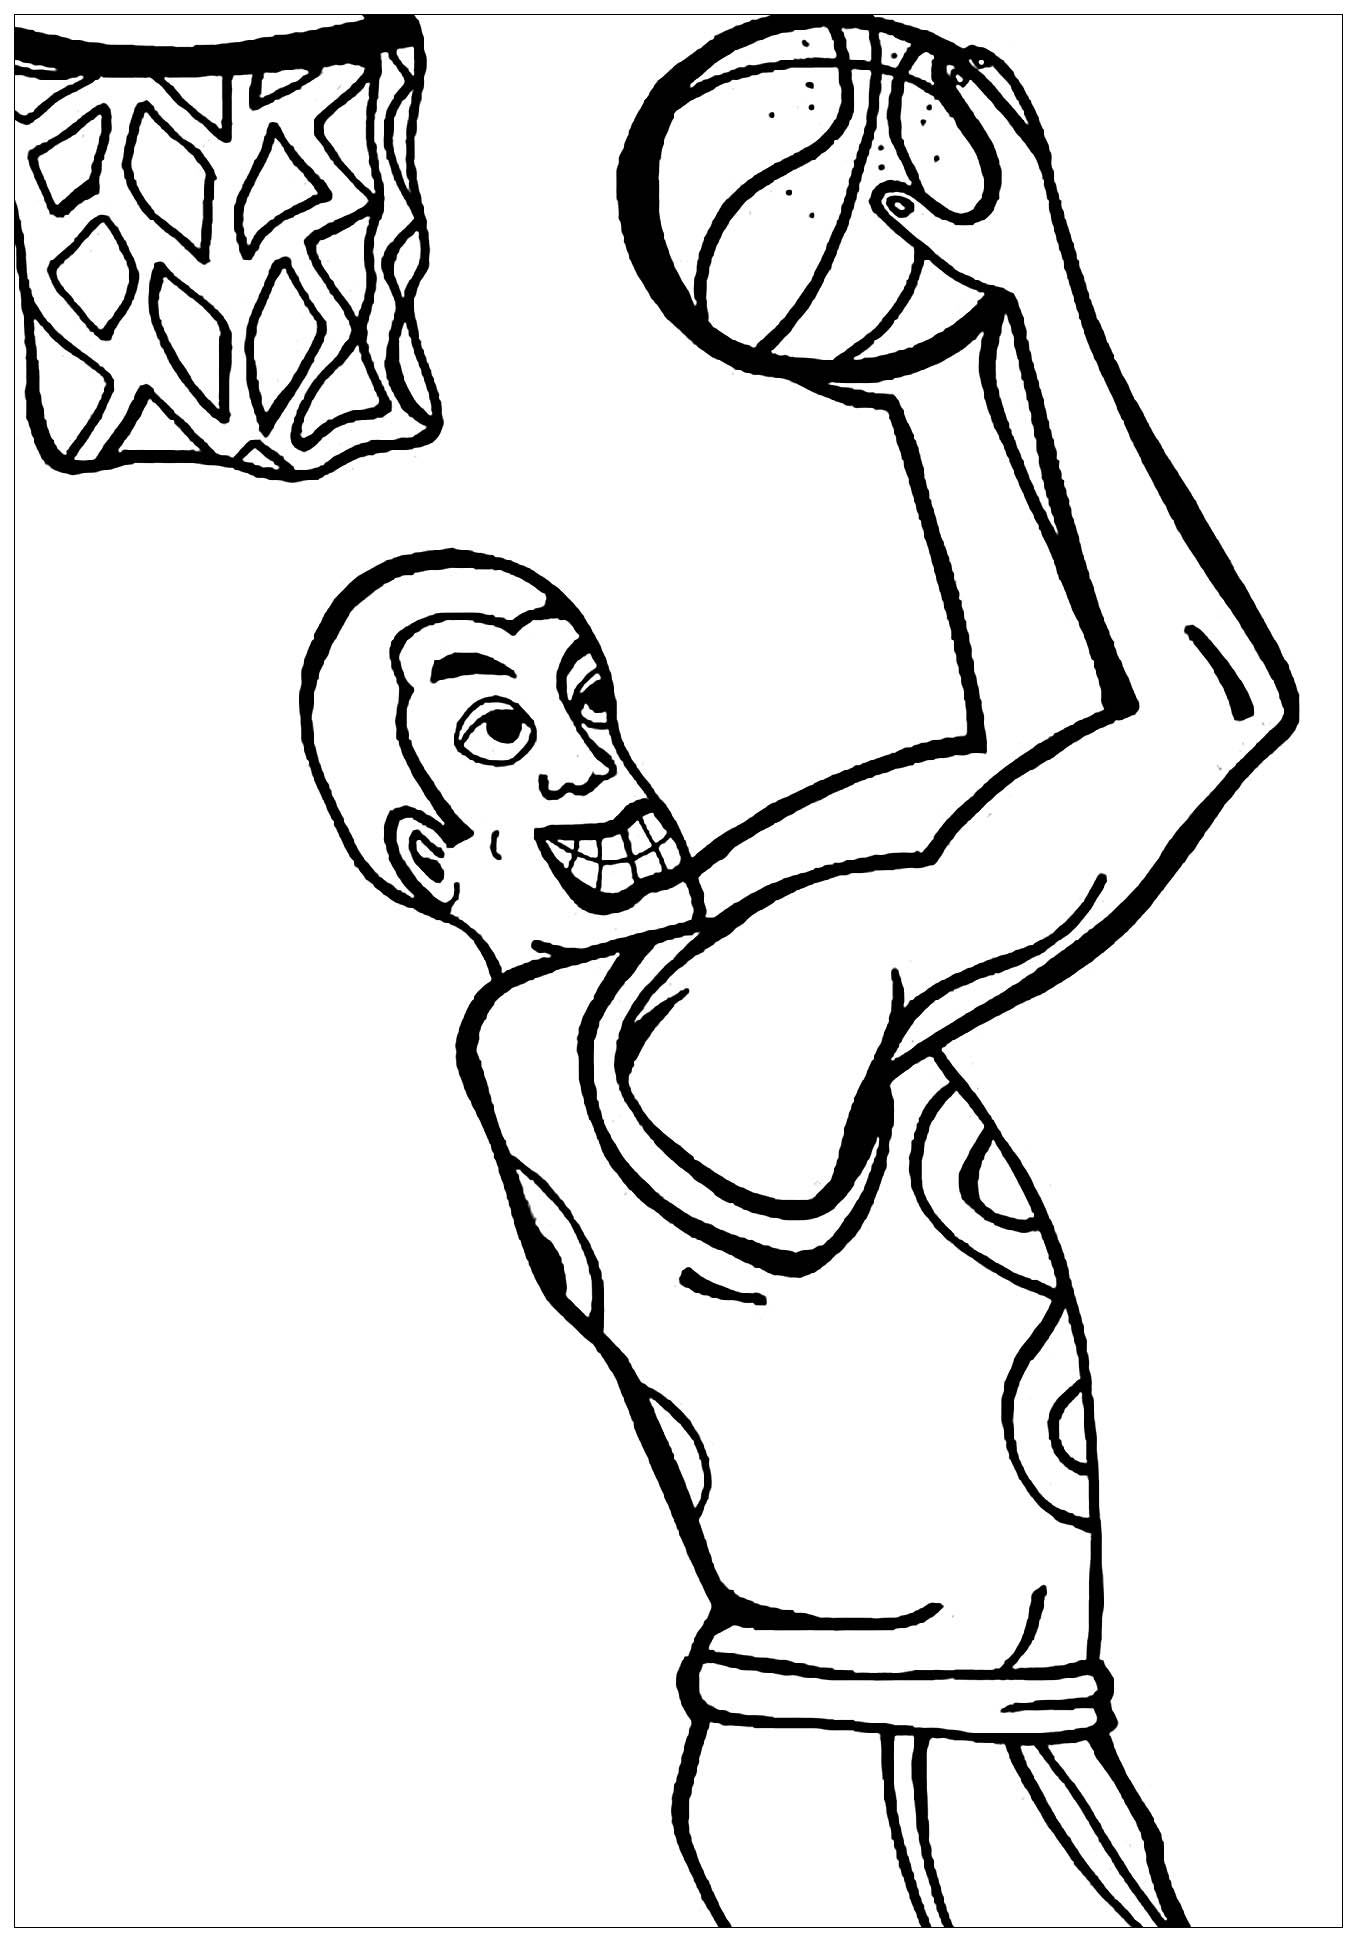 Printable basketball coloring pages for kids Basketball Kids Coloring